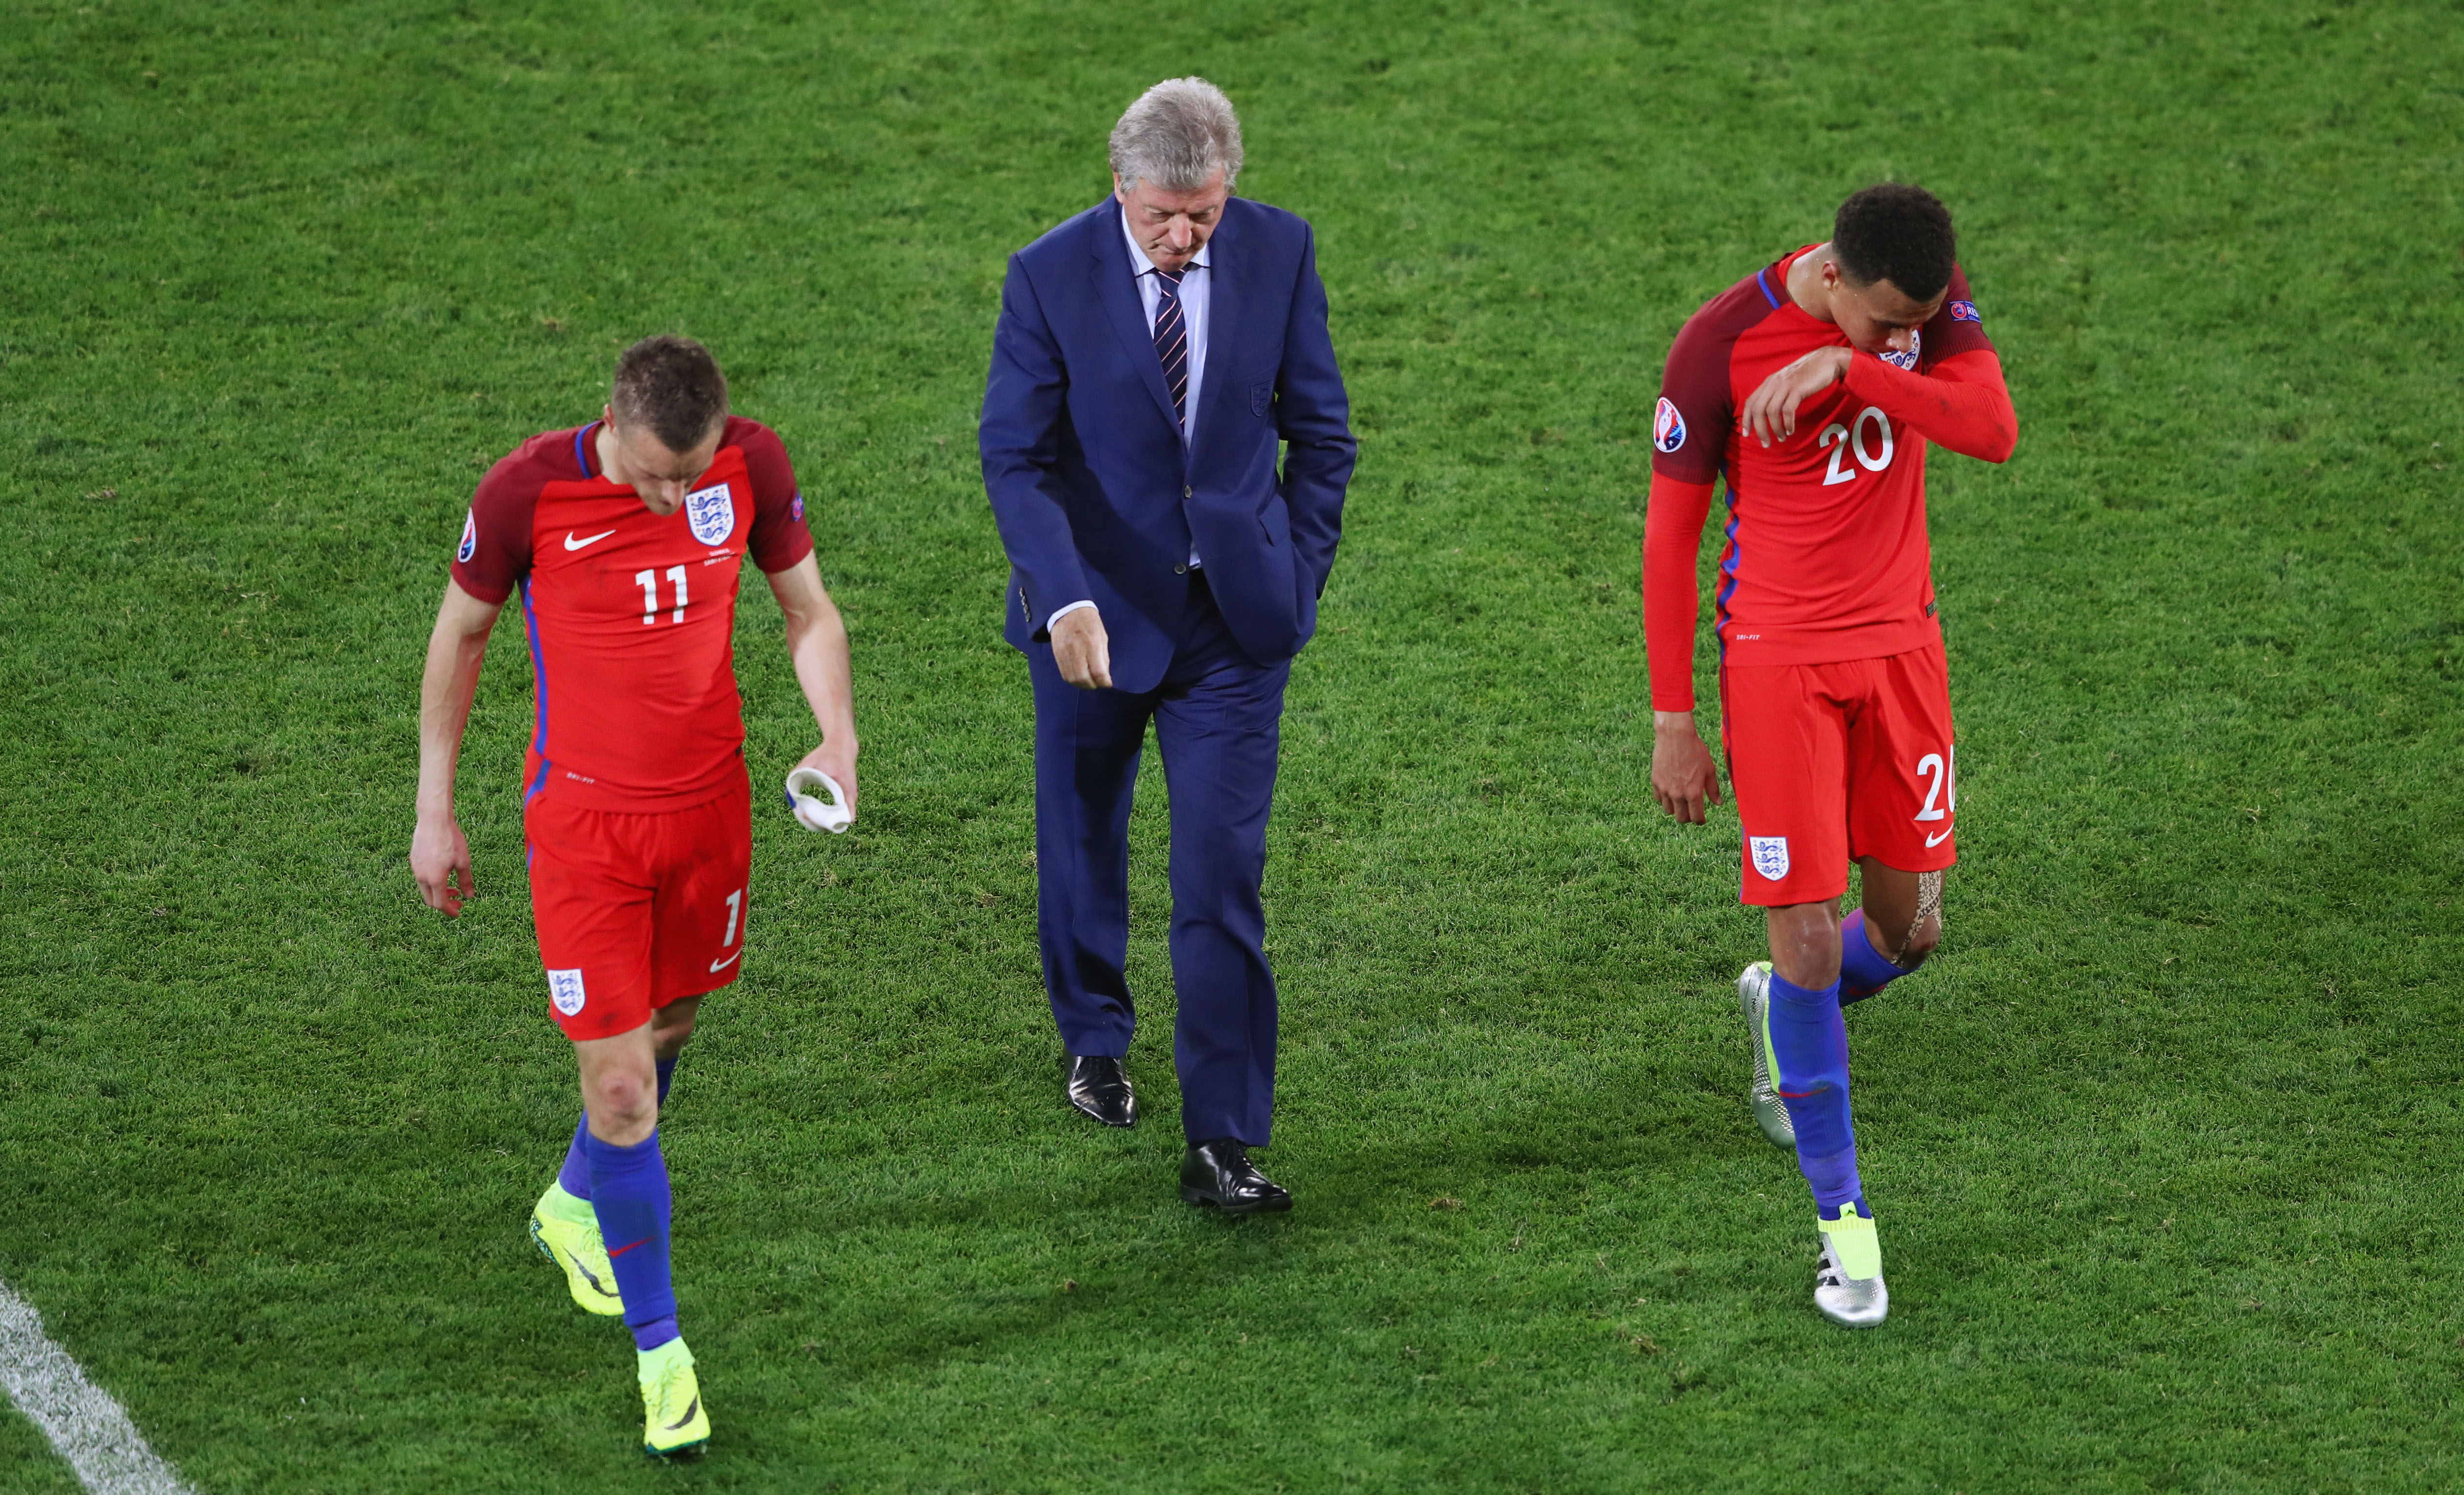 SAINT-ETIENNE, FRANCE - JUNE 20: (L to R) Jamie Vardy, manager Roy Hodgson and Dele Alli of England show their frustration after their scoreless draw in the UEFA EURO 2016 Group B match between Slovakia and England at Stade Geoffroy-Guichard on June 20, 2016 in Saint-Etienne, France.  (Photo by Michael Steele/Getty Images)